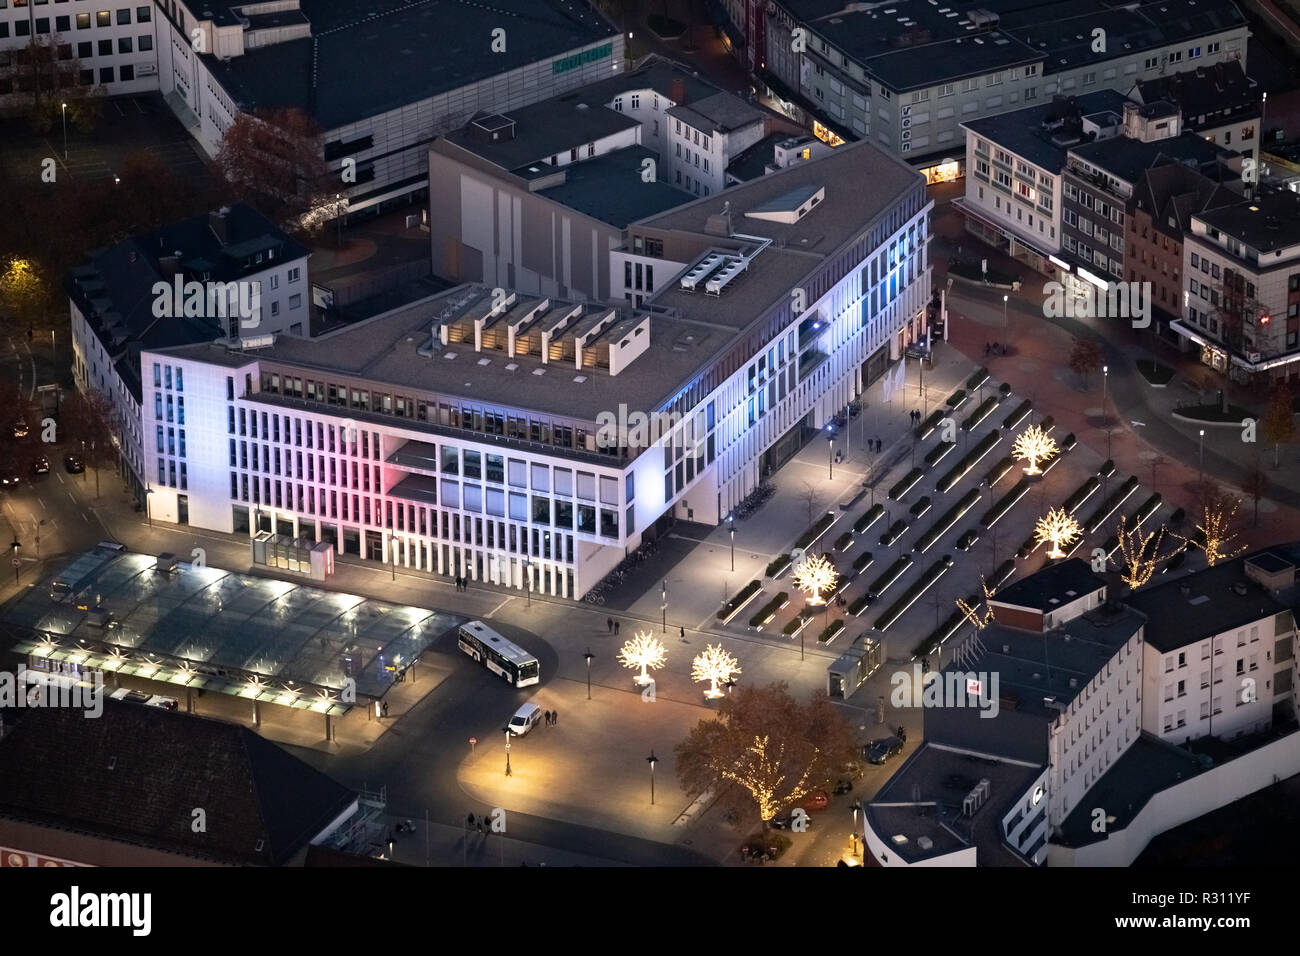 On the mind, DEU, Germany, Europe, Hamm, Hamm Central Station, SRH College of Logistics and Economics, downtown Hamm, Kleist Forum, aerial photography Stock Photo